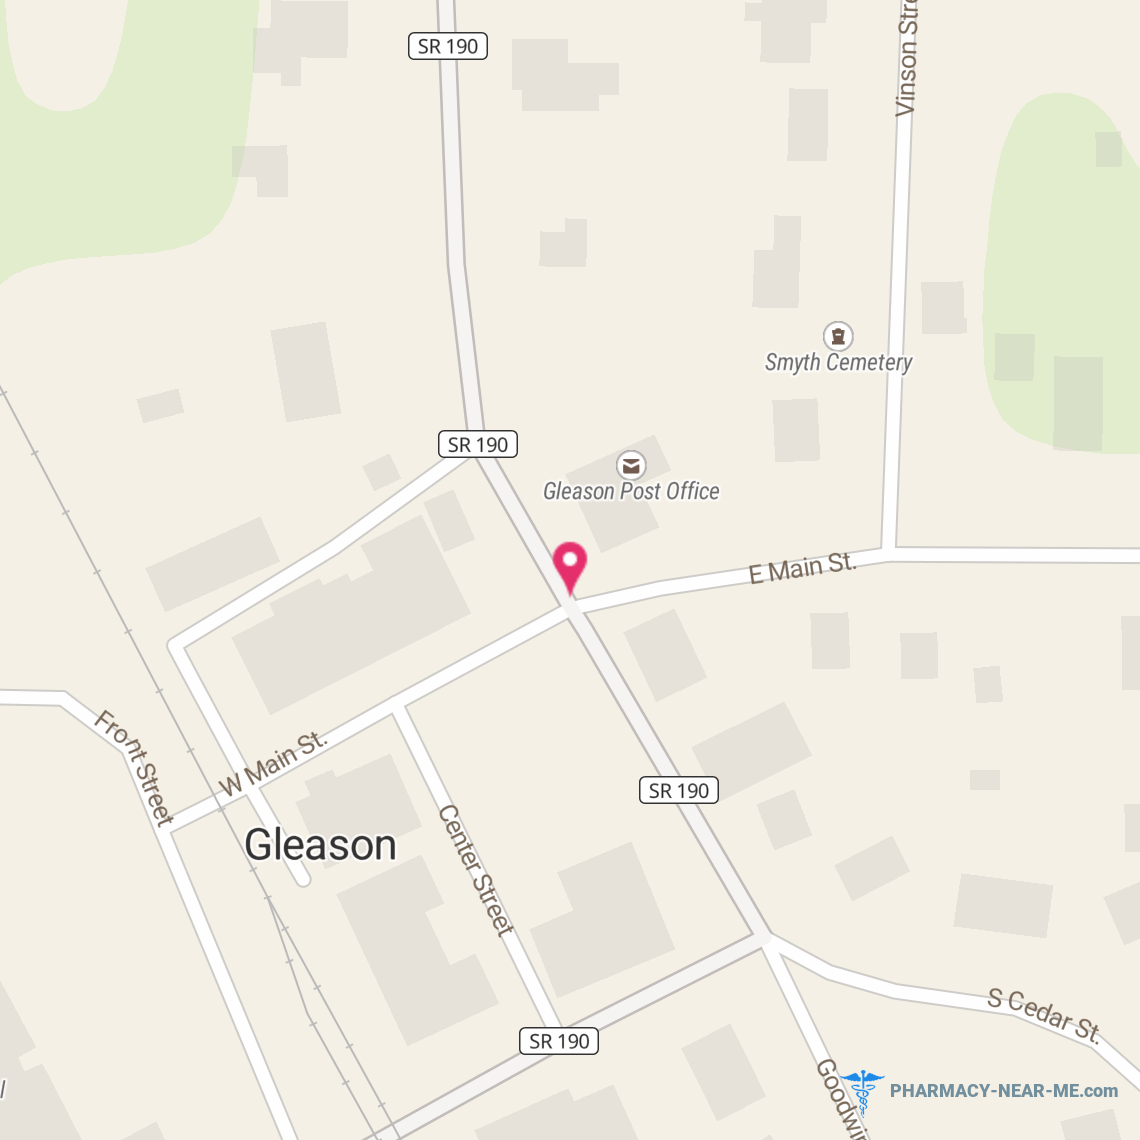 GLEASON CITY DRUG STORE - Pharmacy Hours, Phone, Reviews & Information: 102 Main St, Gleason, Tennessee 38229, United States